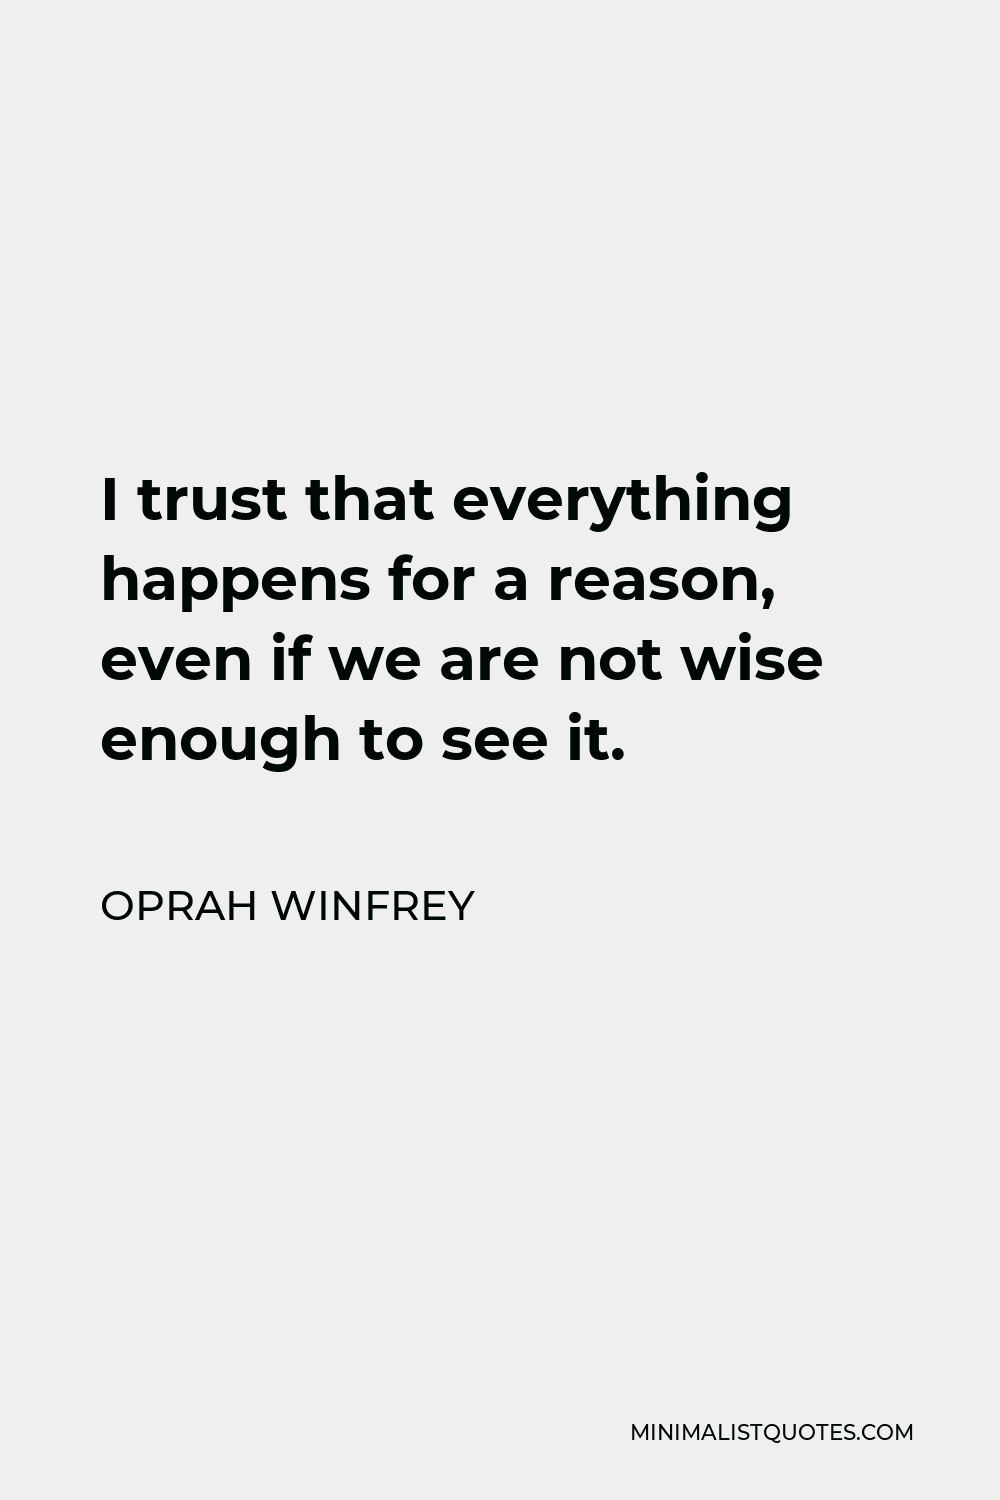 Oprah Winfrey Quote - I trust that everything happens for a reason, even if we are not wise enough to see it.